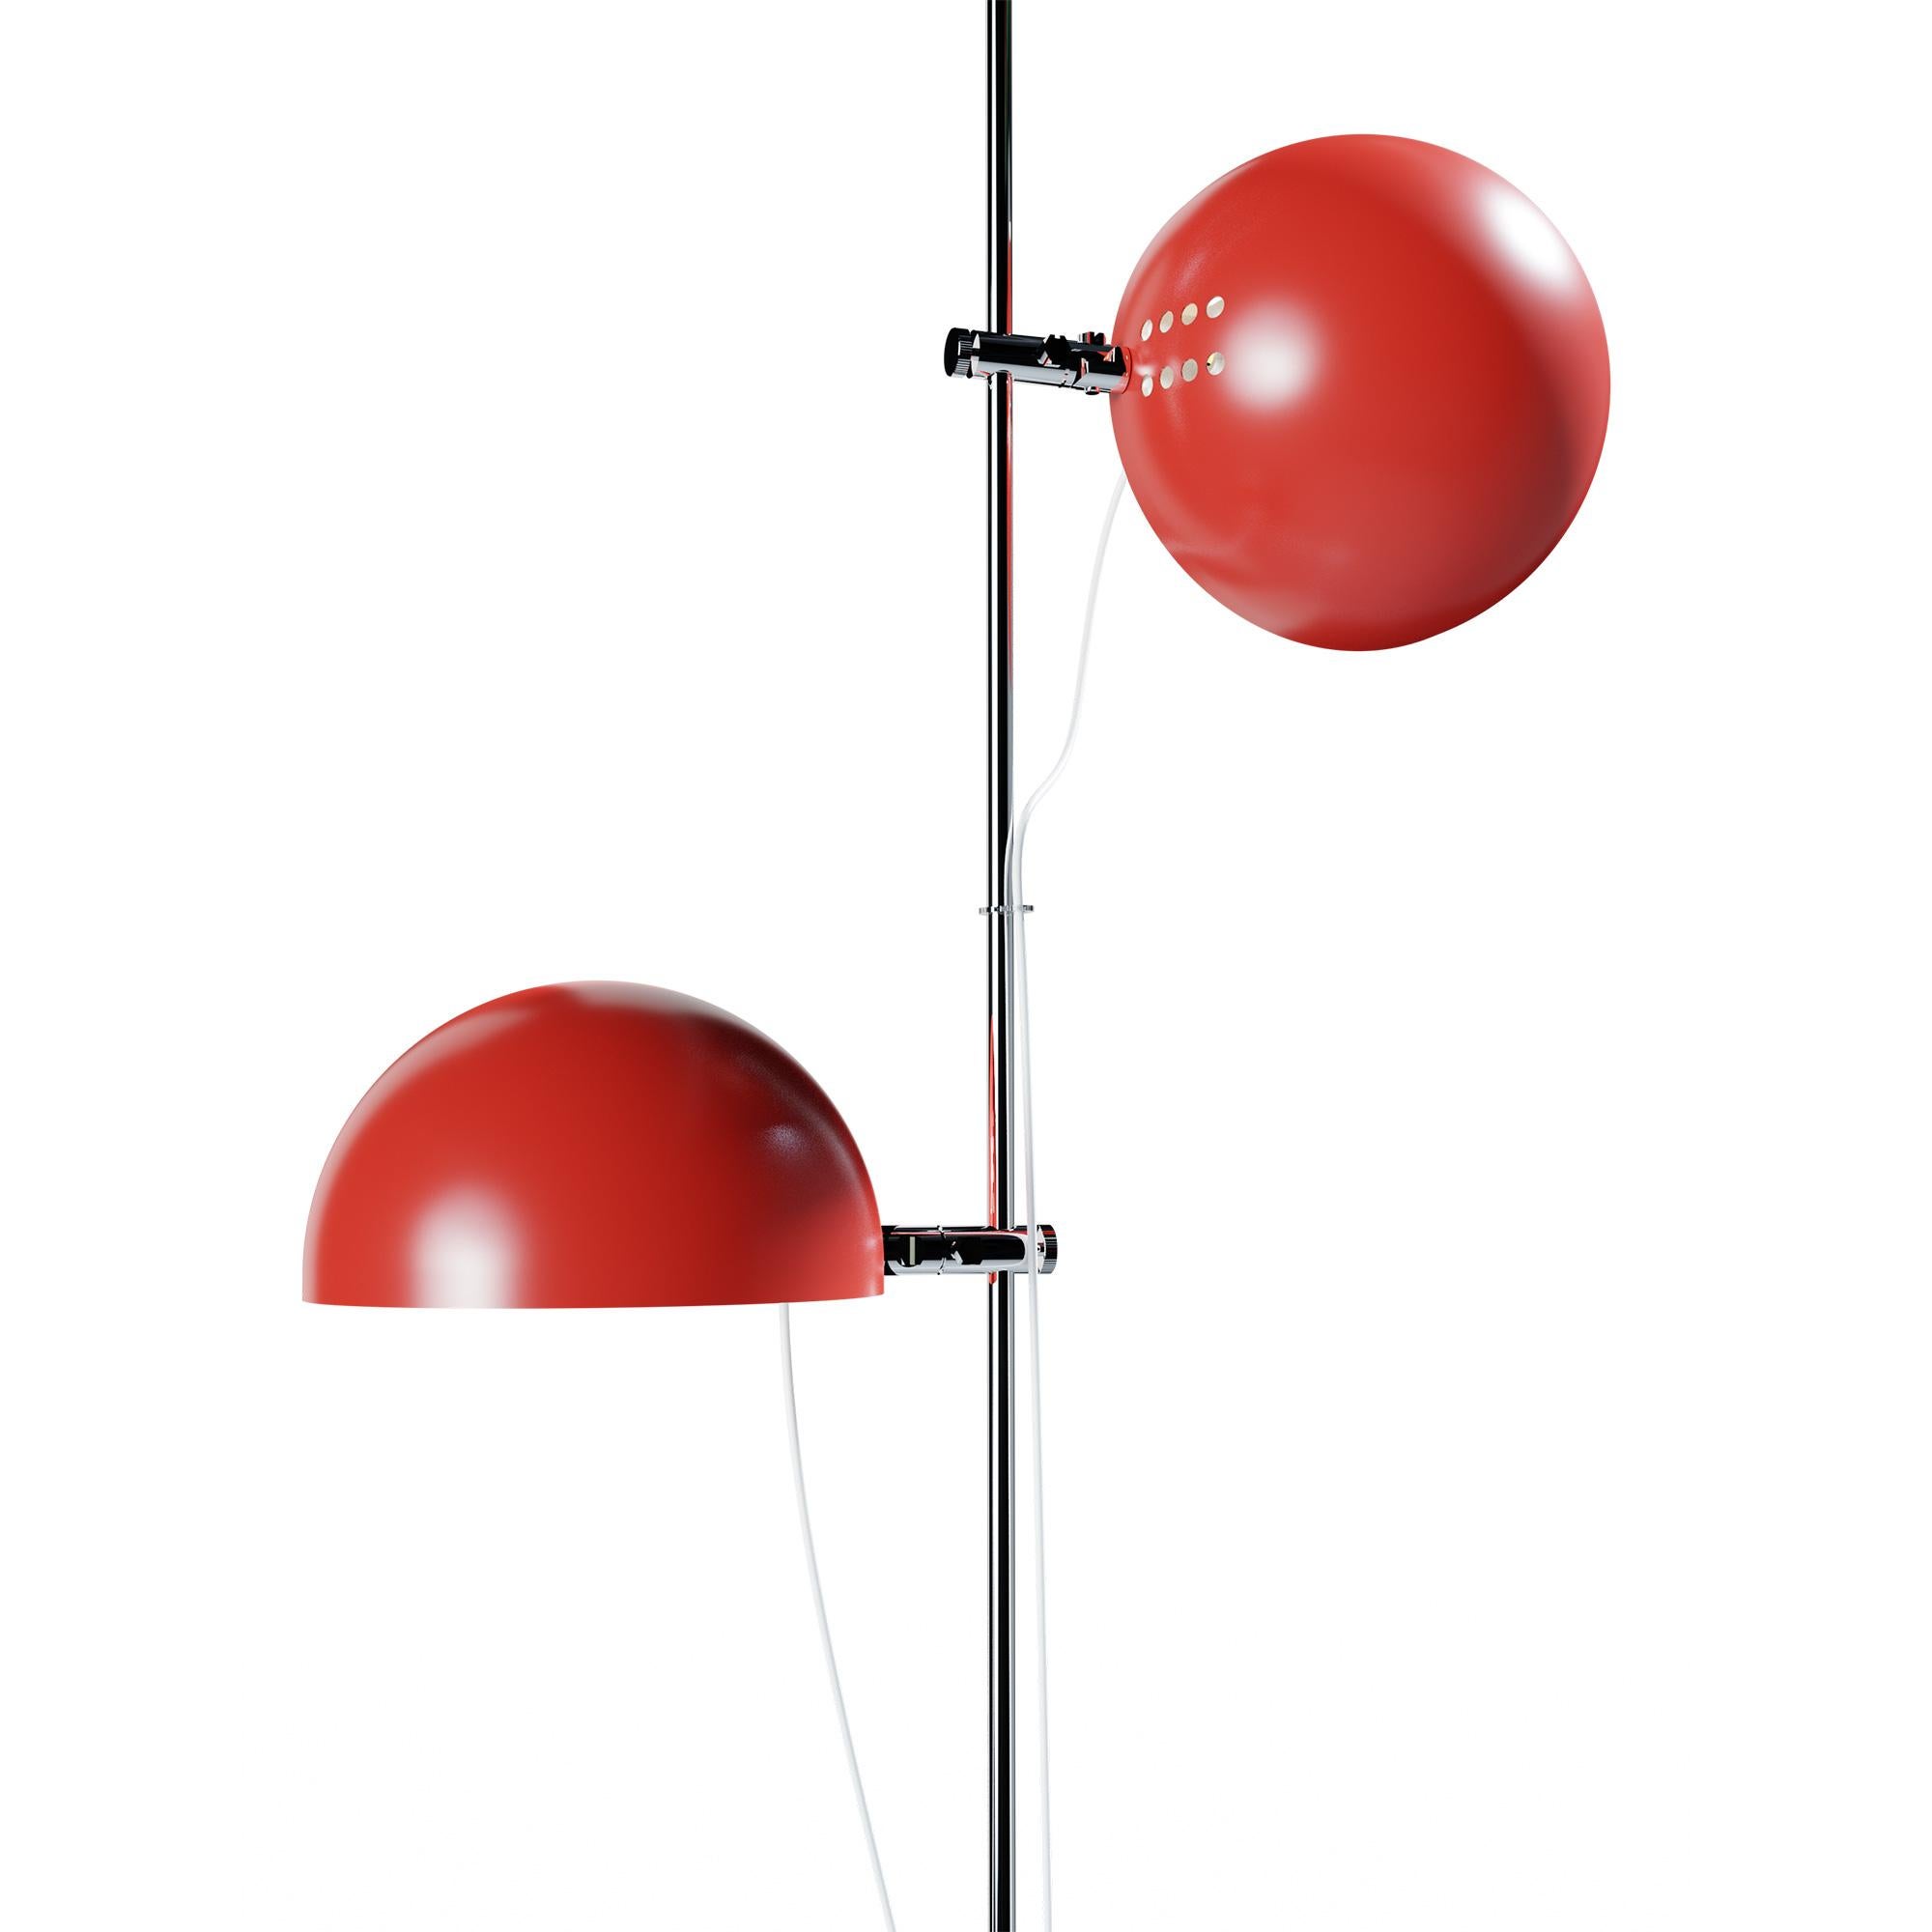 Metal A23 Floor Lamp by Disderot
Limited Edition. 
Designed by Alain Richard
Dimensions: Ø 40 x H 150 cm.
Materials: Lacquered metal.

Delivered with authentication certificate. Made in France. Available in different color options. Custom options